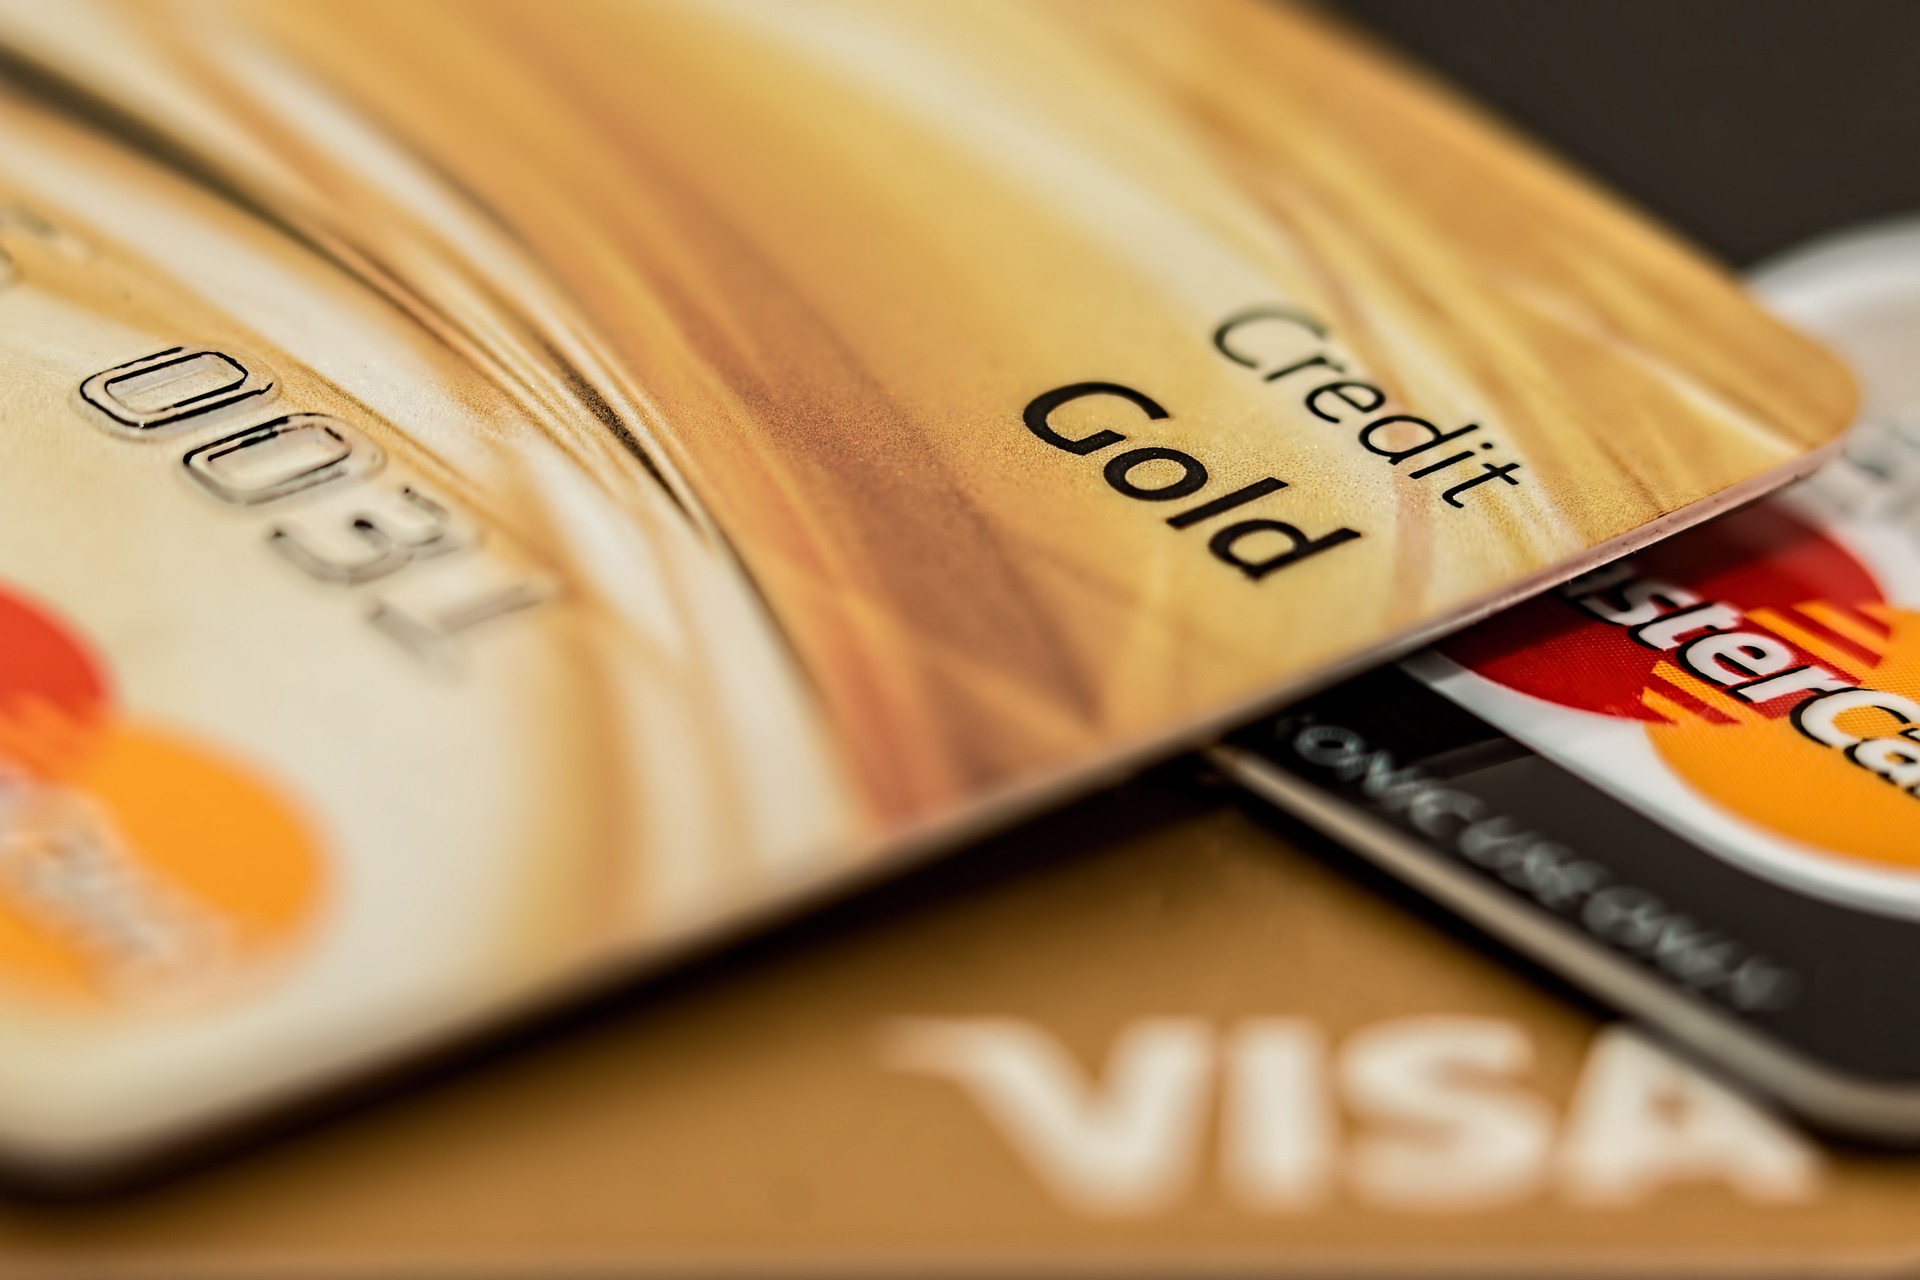 History of the development of credit cards